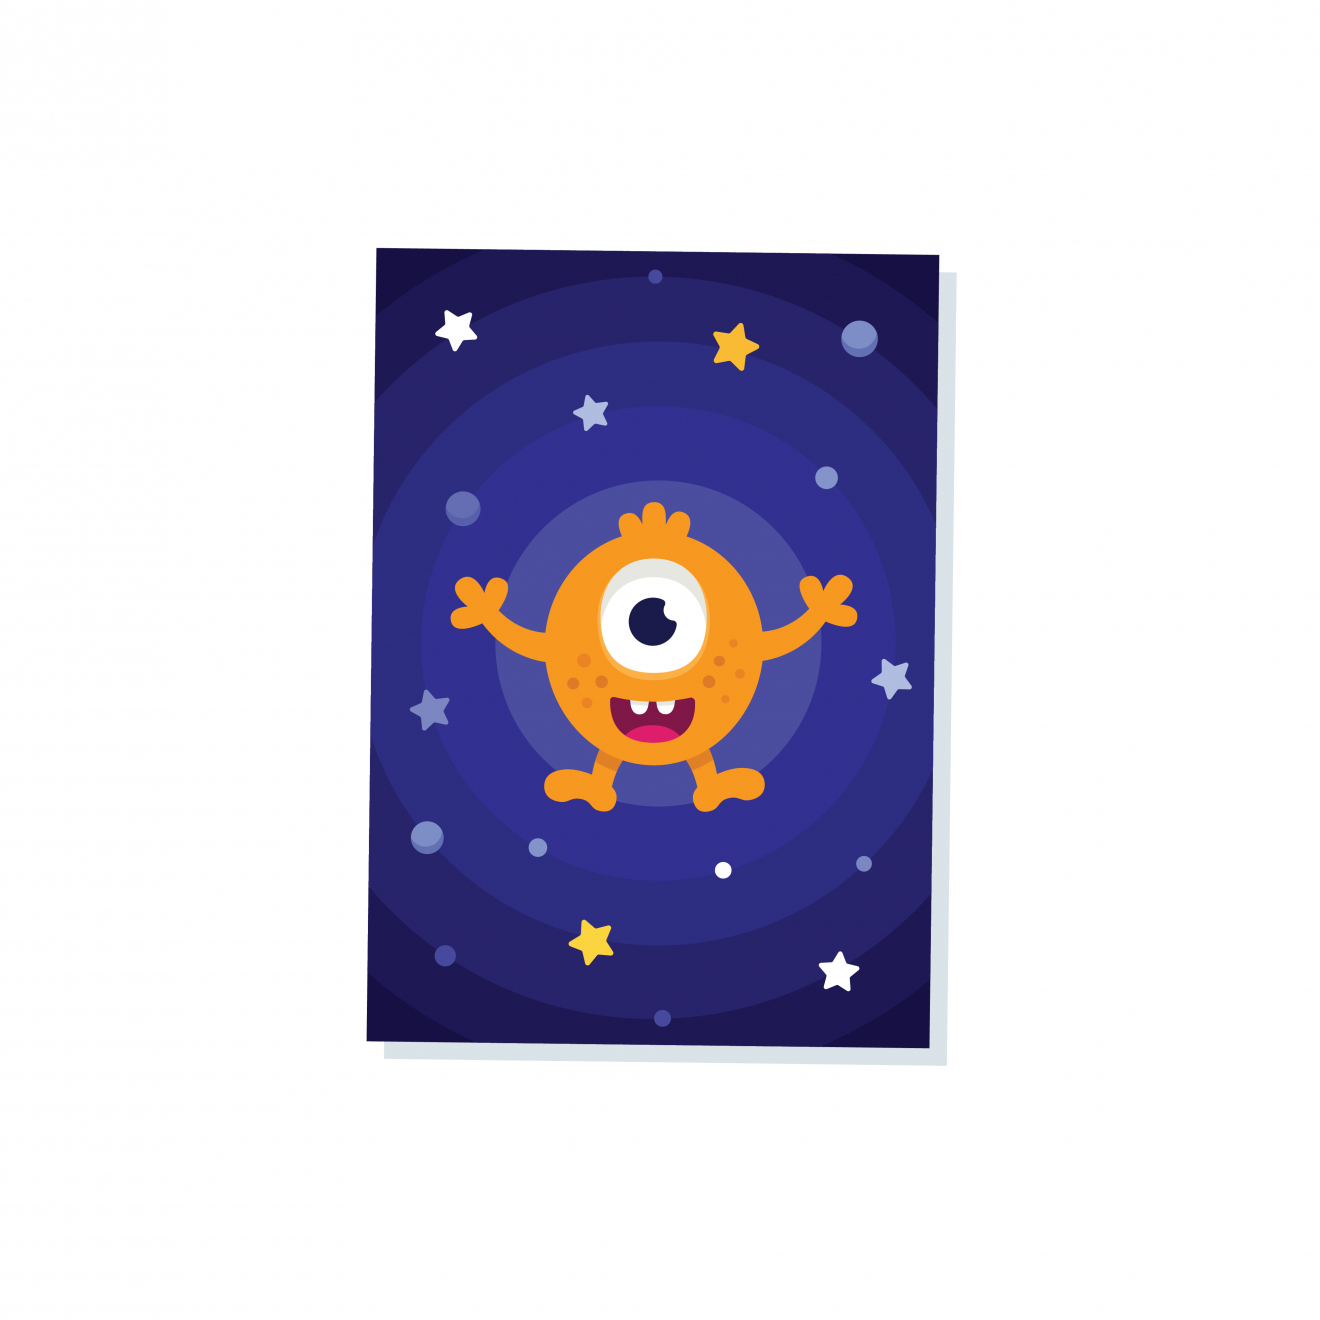 Image of the product Starry sky, from the product category Prints